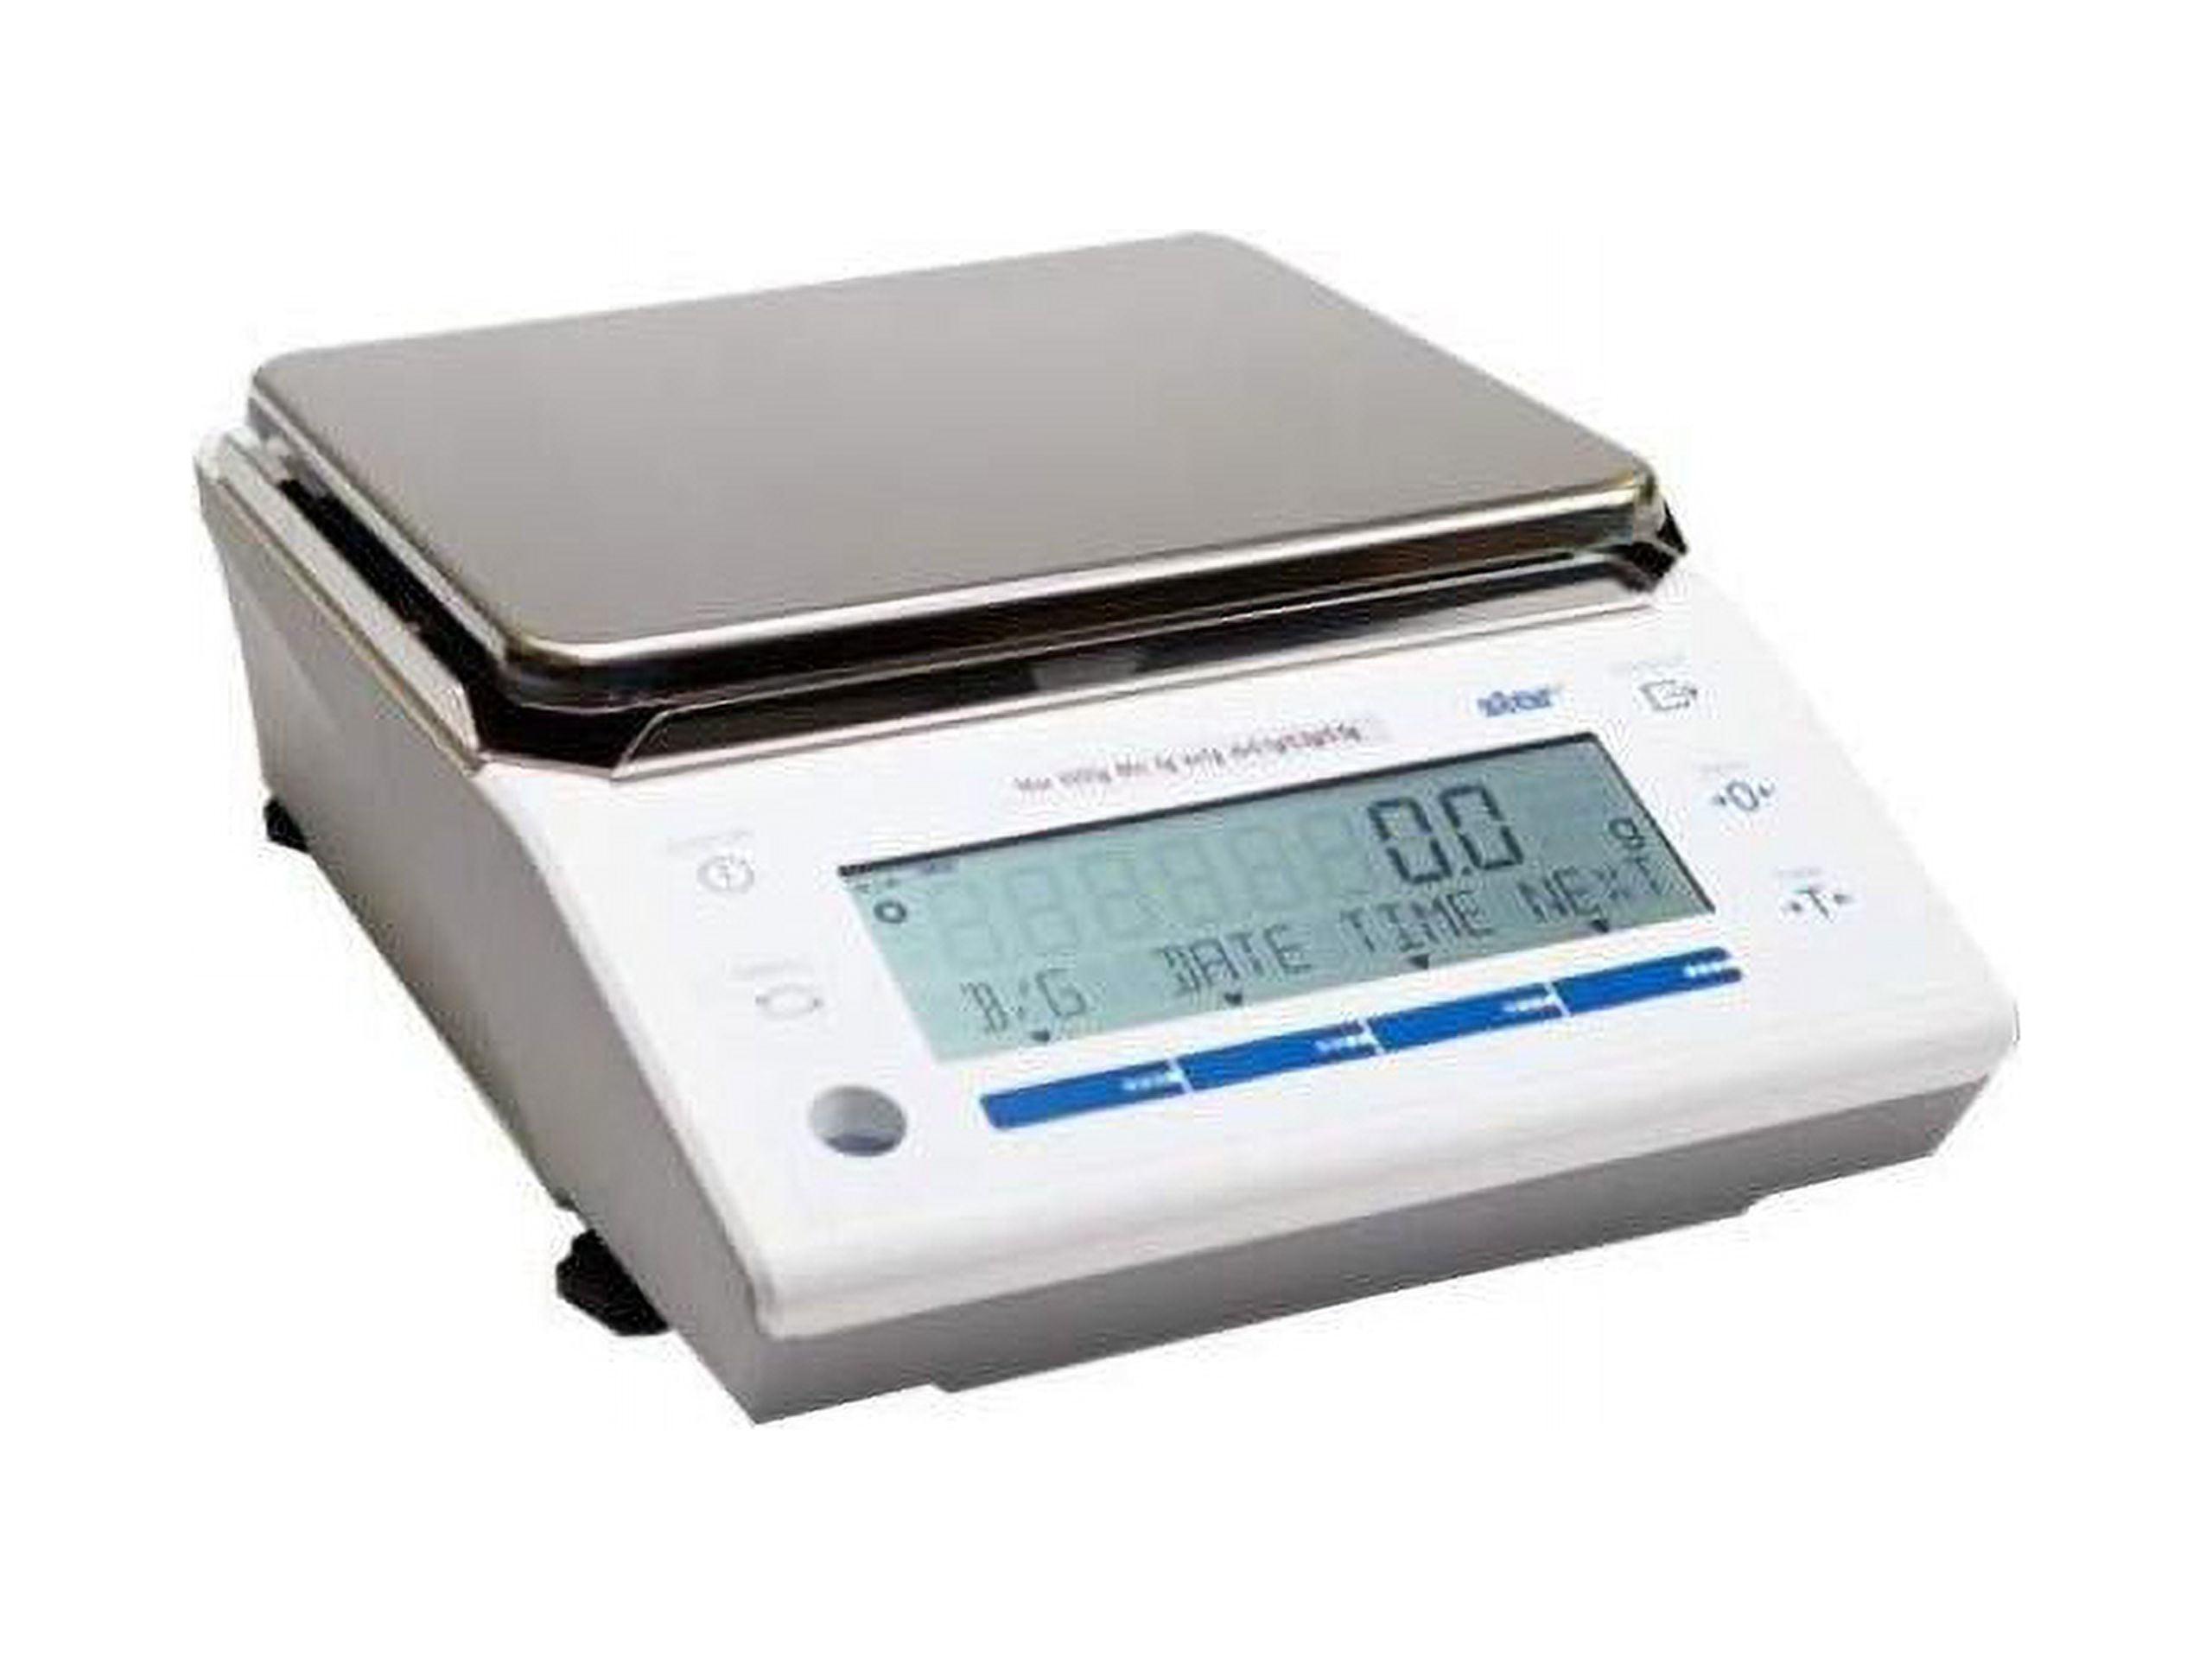 CAMRY Price Computing Scale Digital Commercial Food Meat Scale 66LB  16Inches Platform (Package is Damaged, Product is Brand New) 